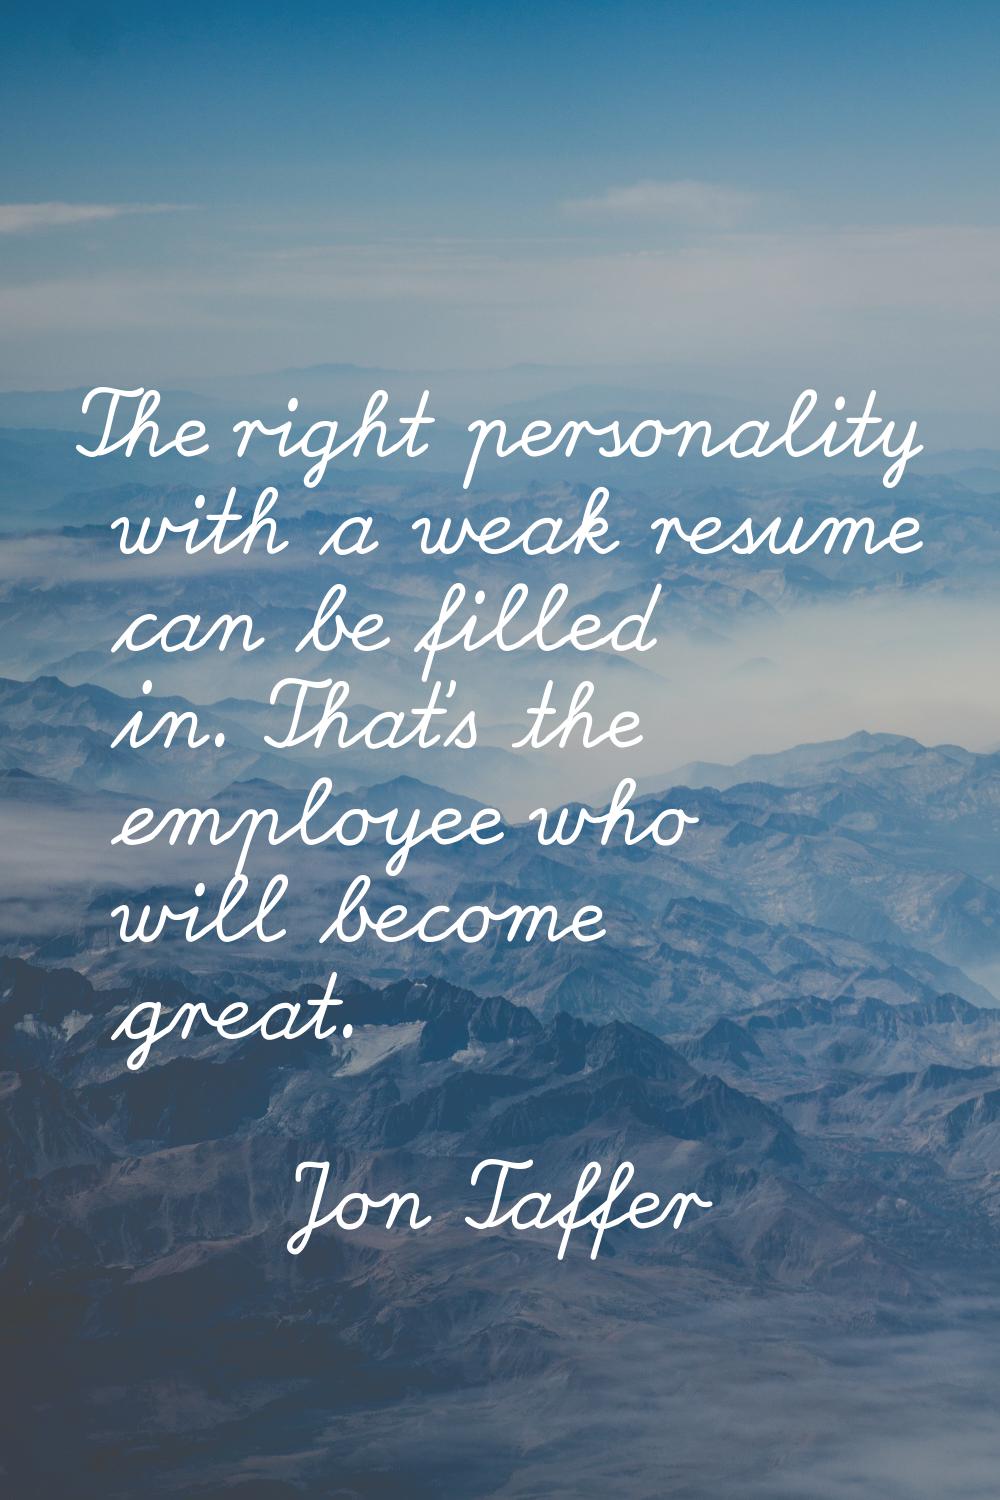 The right personality with a weak resume can be filled in. That's the employee who will become grea